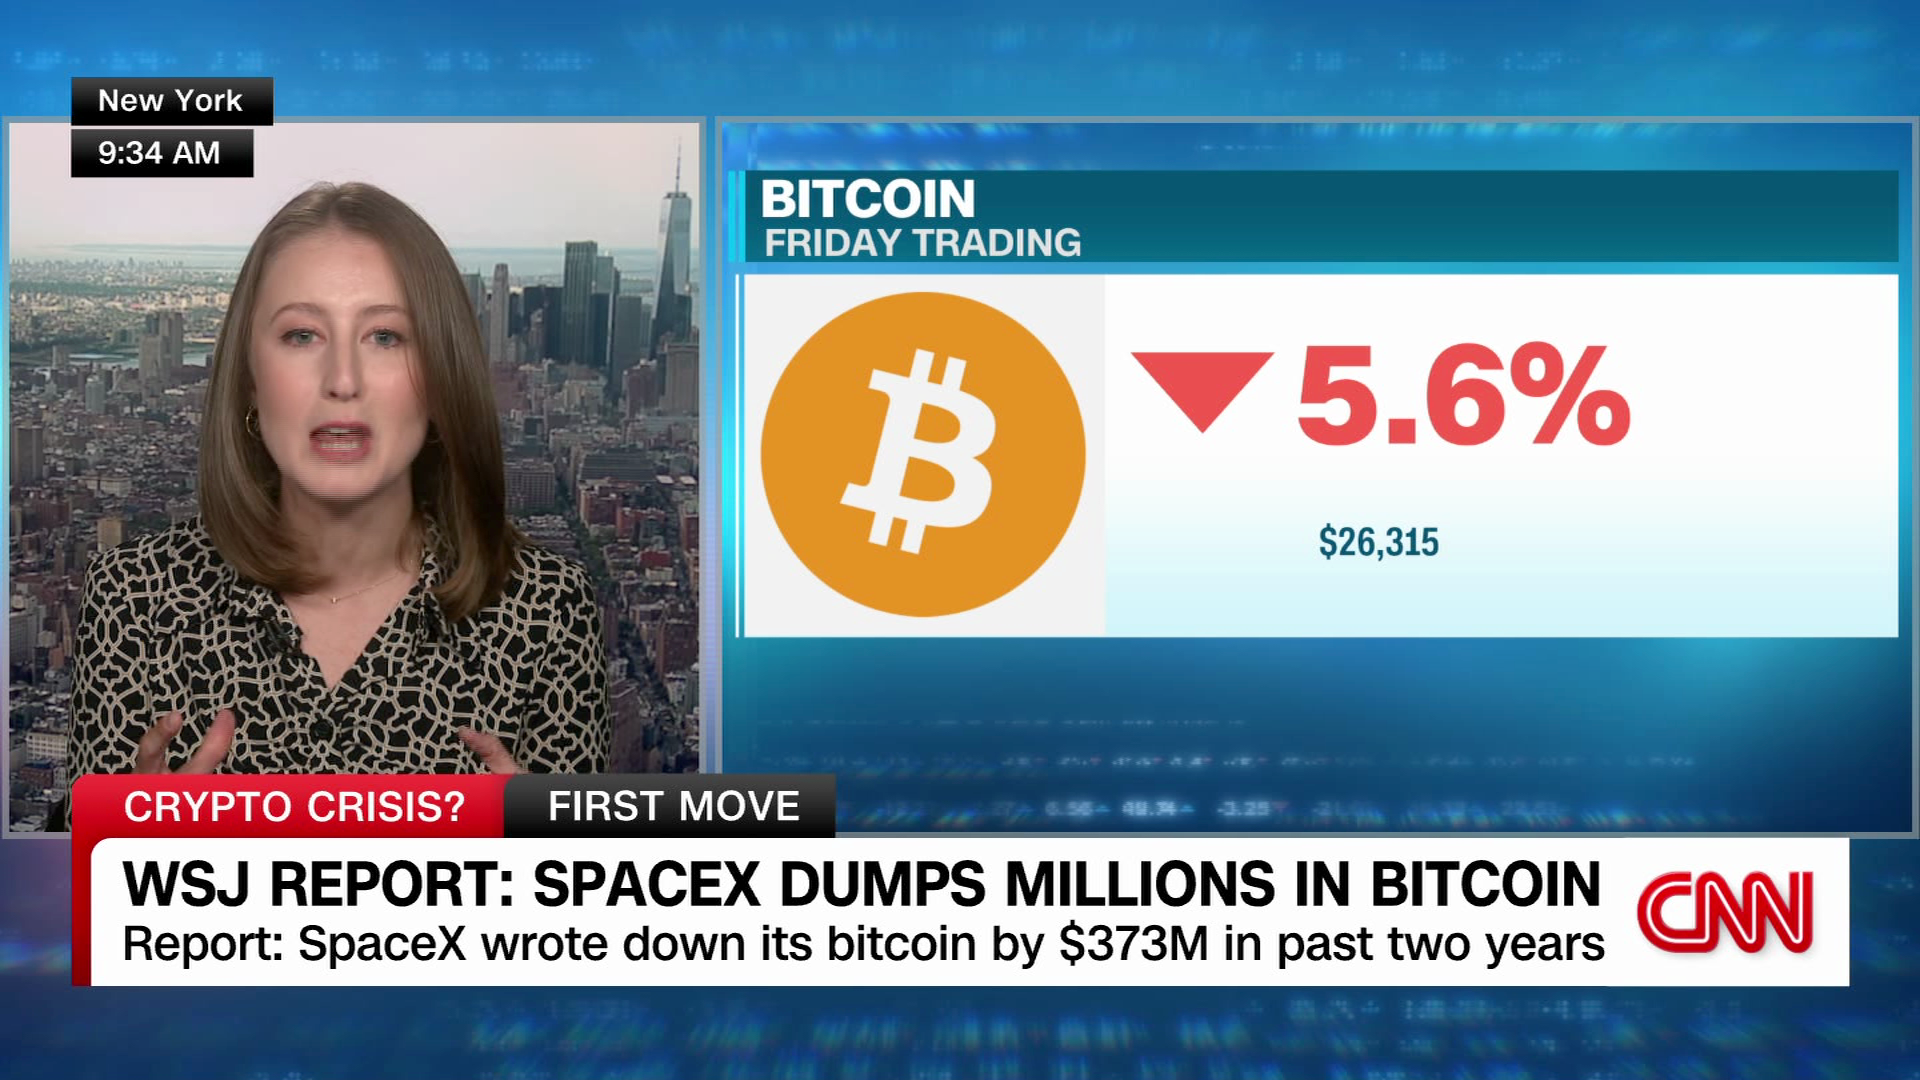 Tesla And SpaceX Bitcoin Holdings Are Now Disclosed With Over $ Billion - Coincu